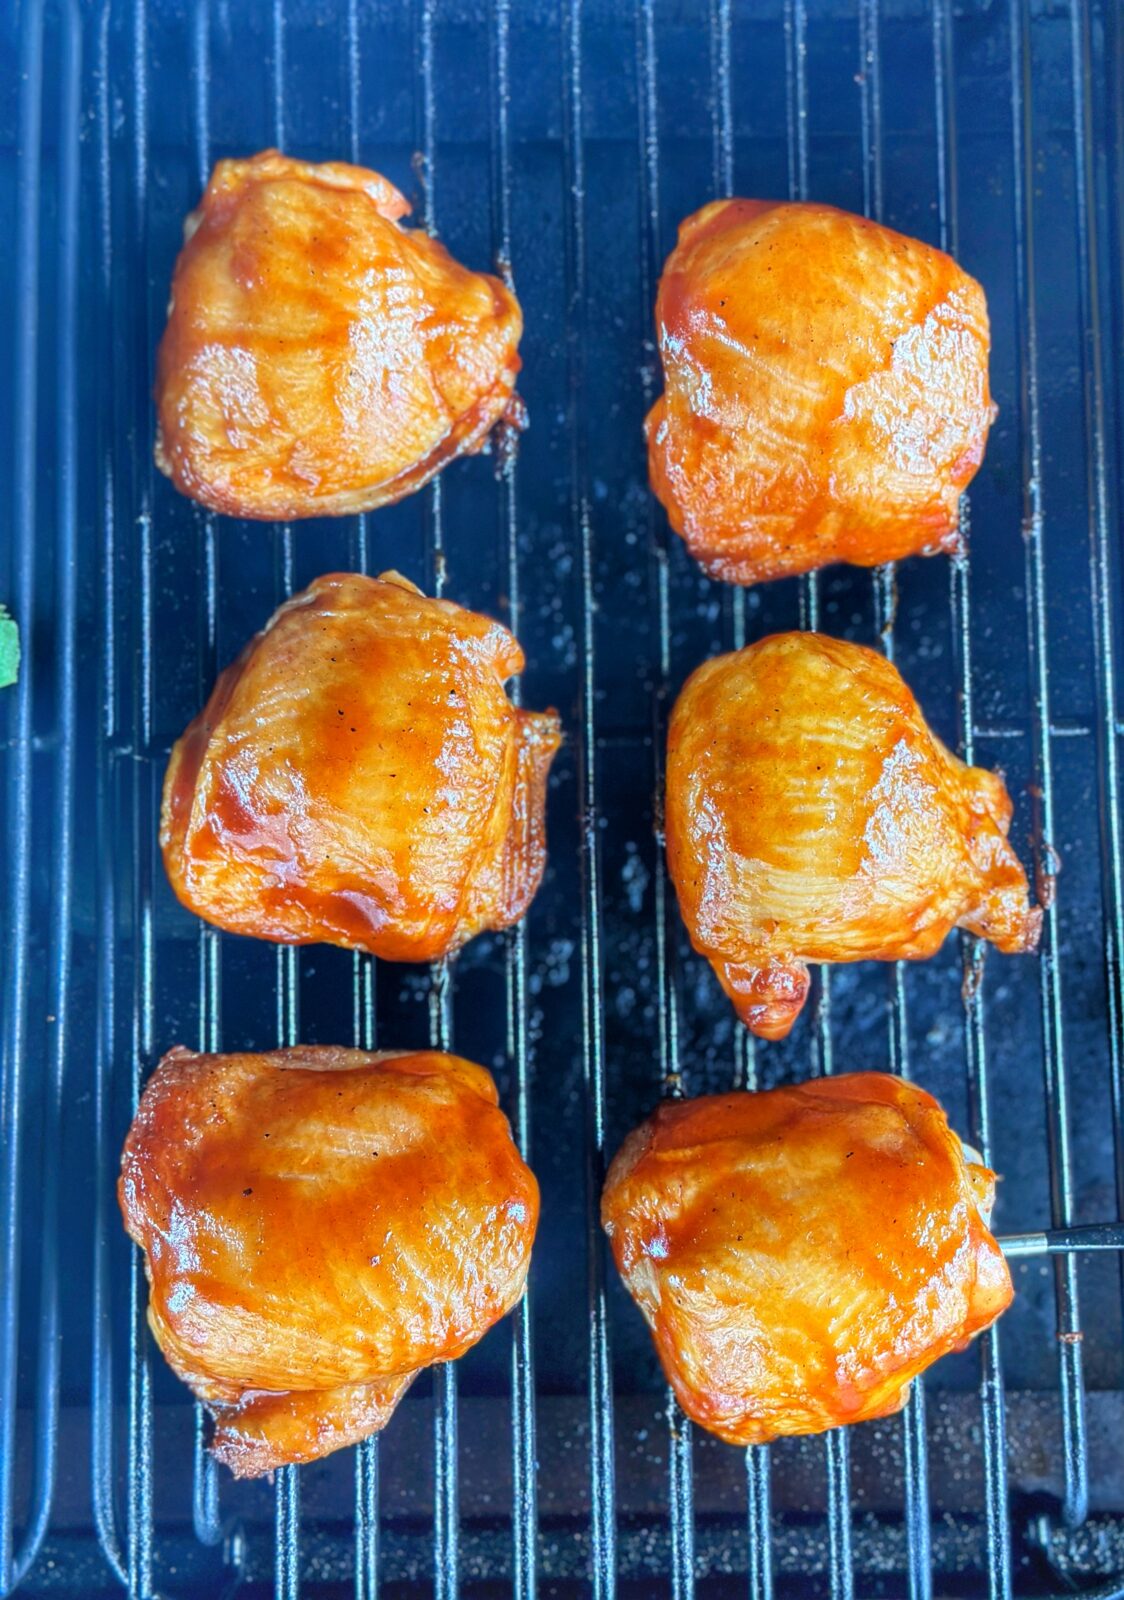 Chicken thighs glazed with BBQ sauce on the grill.